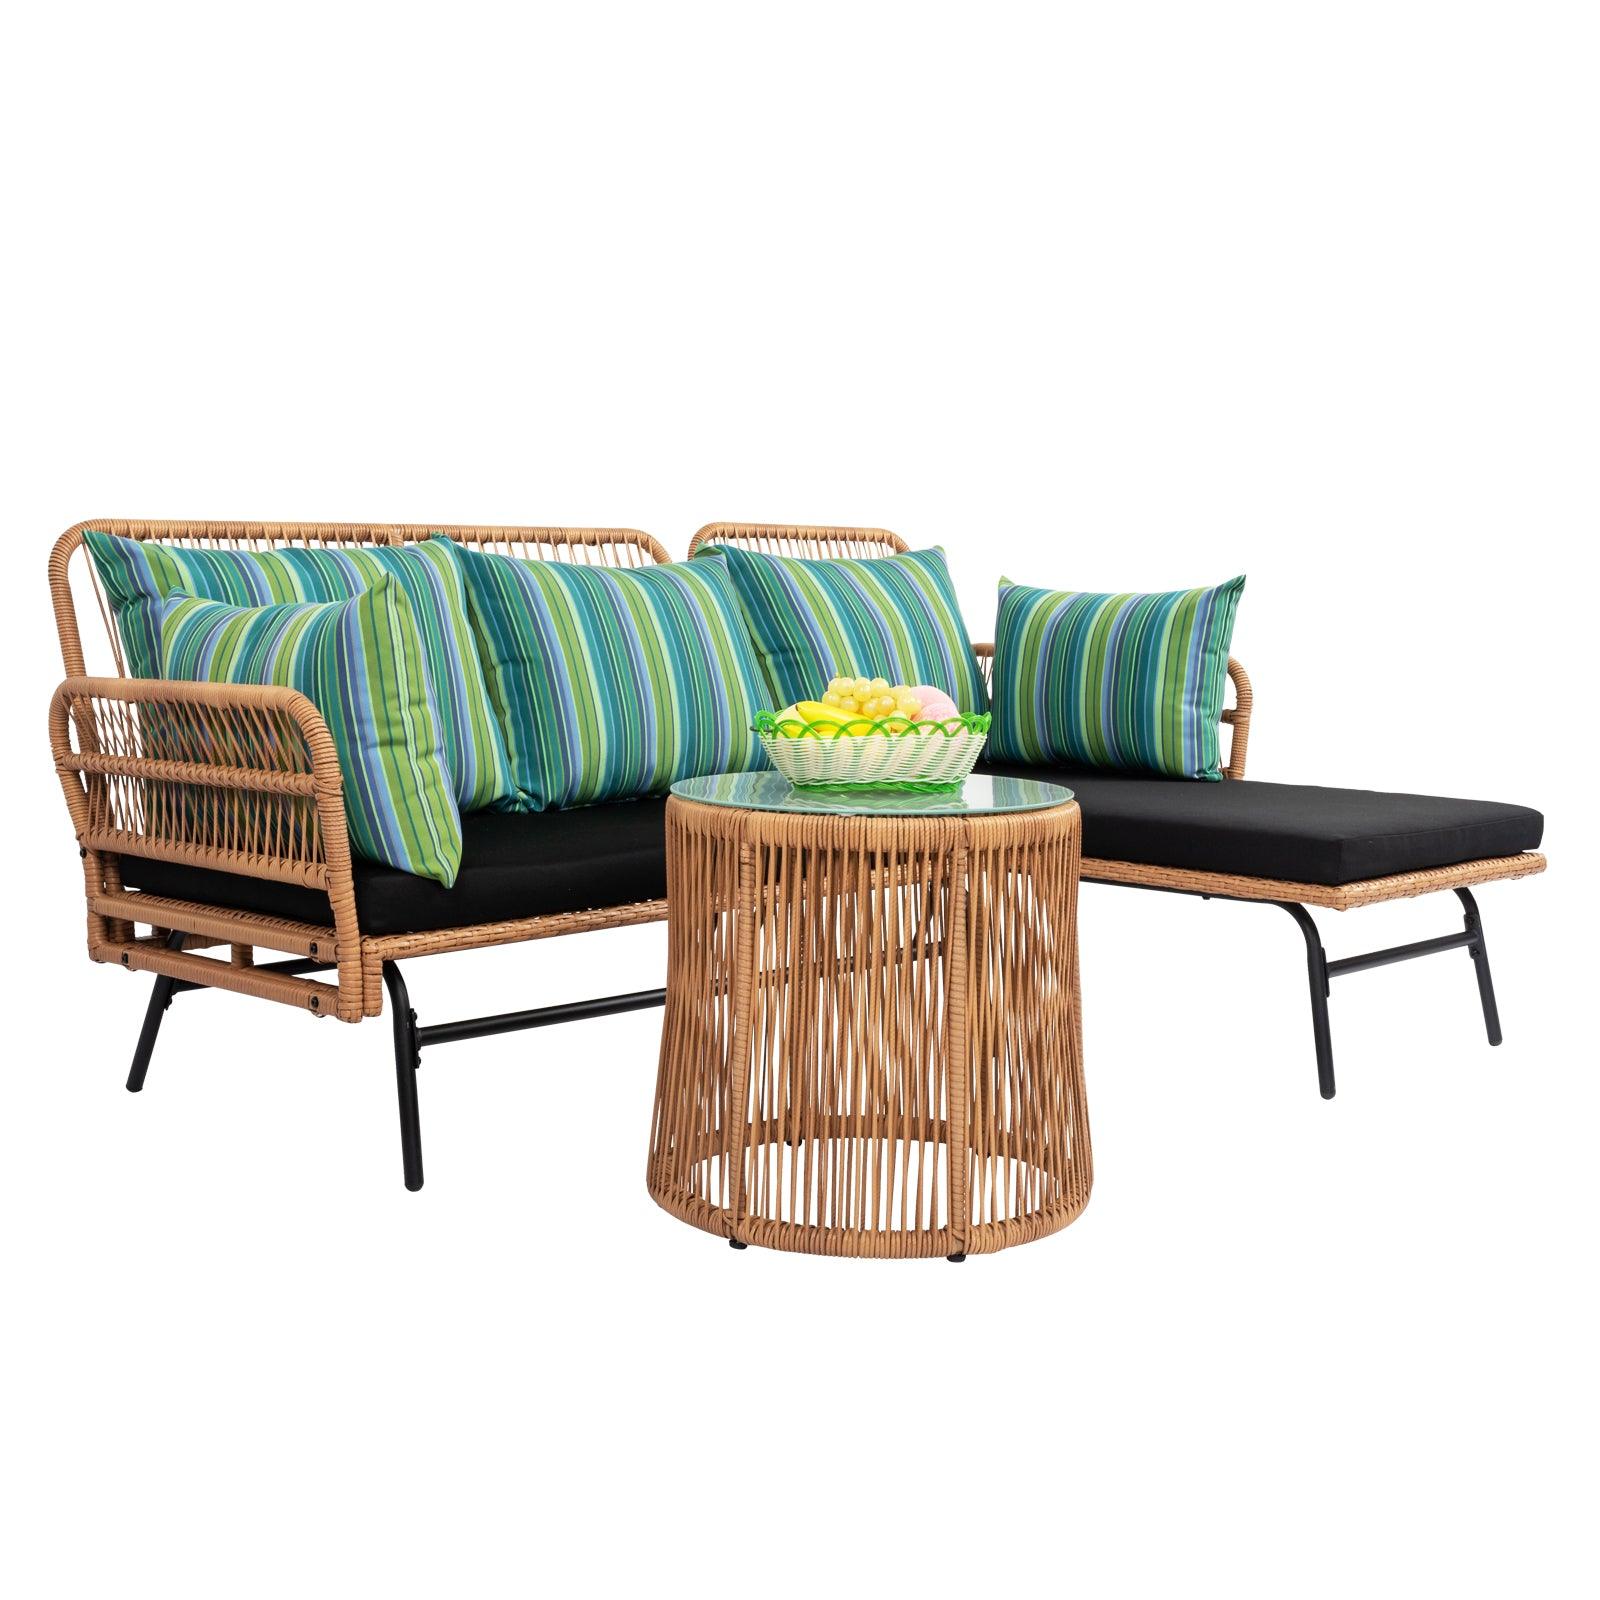 Patio Furniture 3 Piece Set, Rope Woven, Outdoor L-Shaped Garden Sectional Sofa Set, Detachable Lounger, Side Table - Charming Spaces